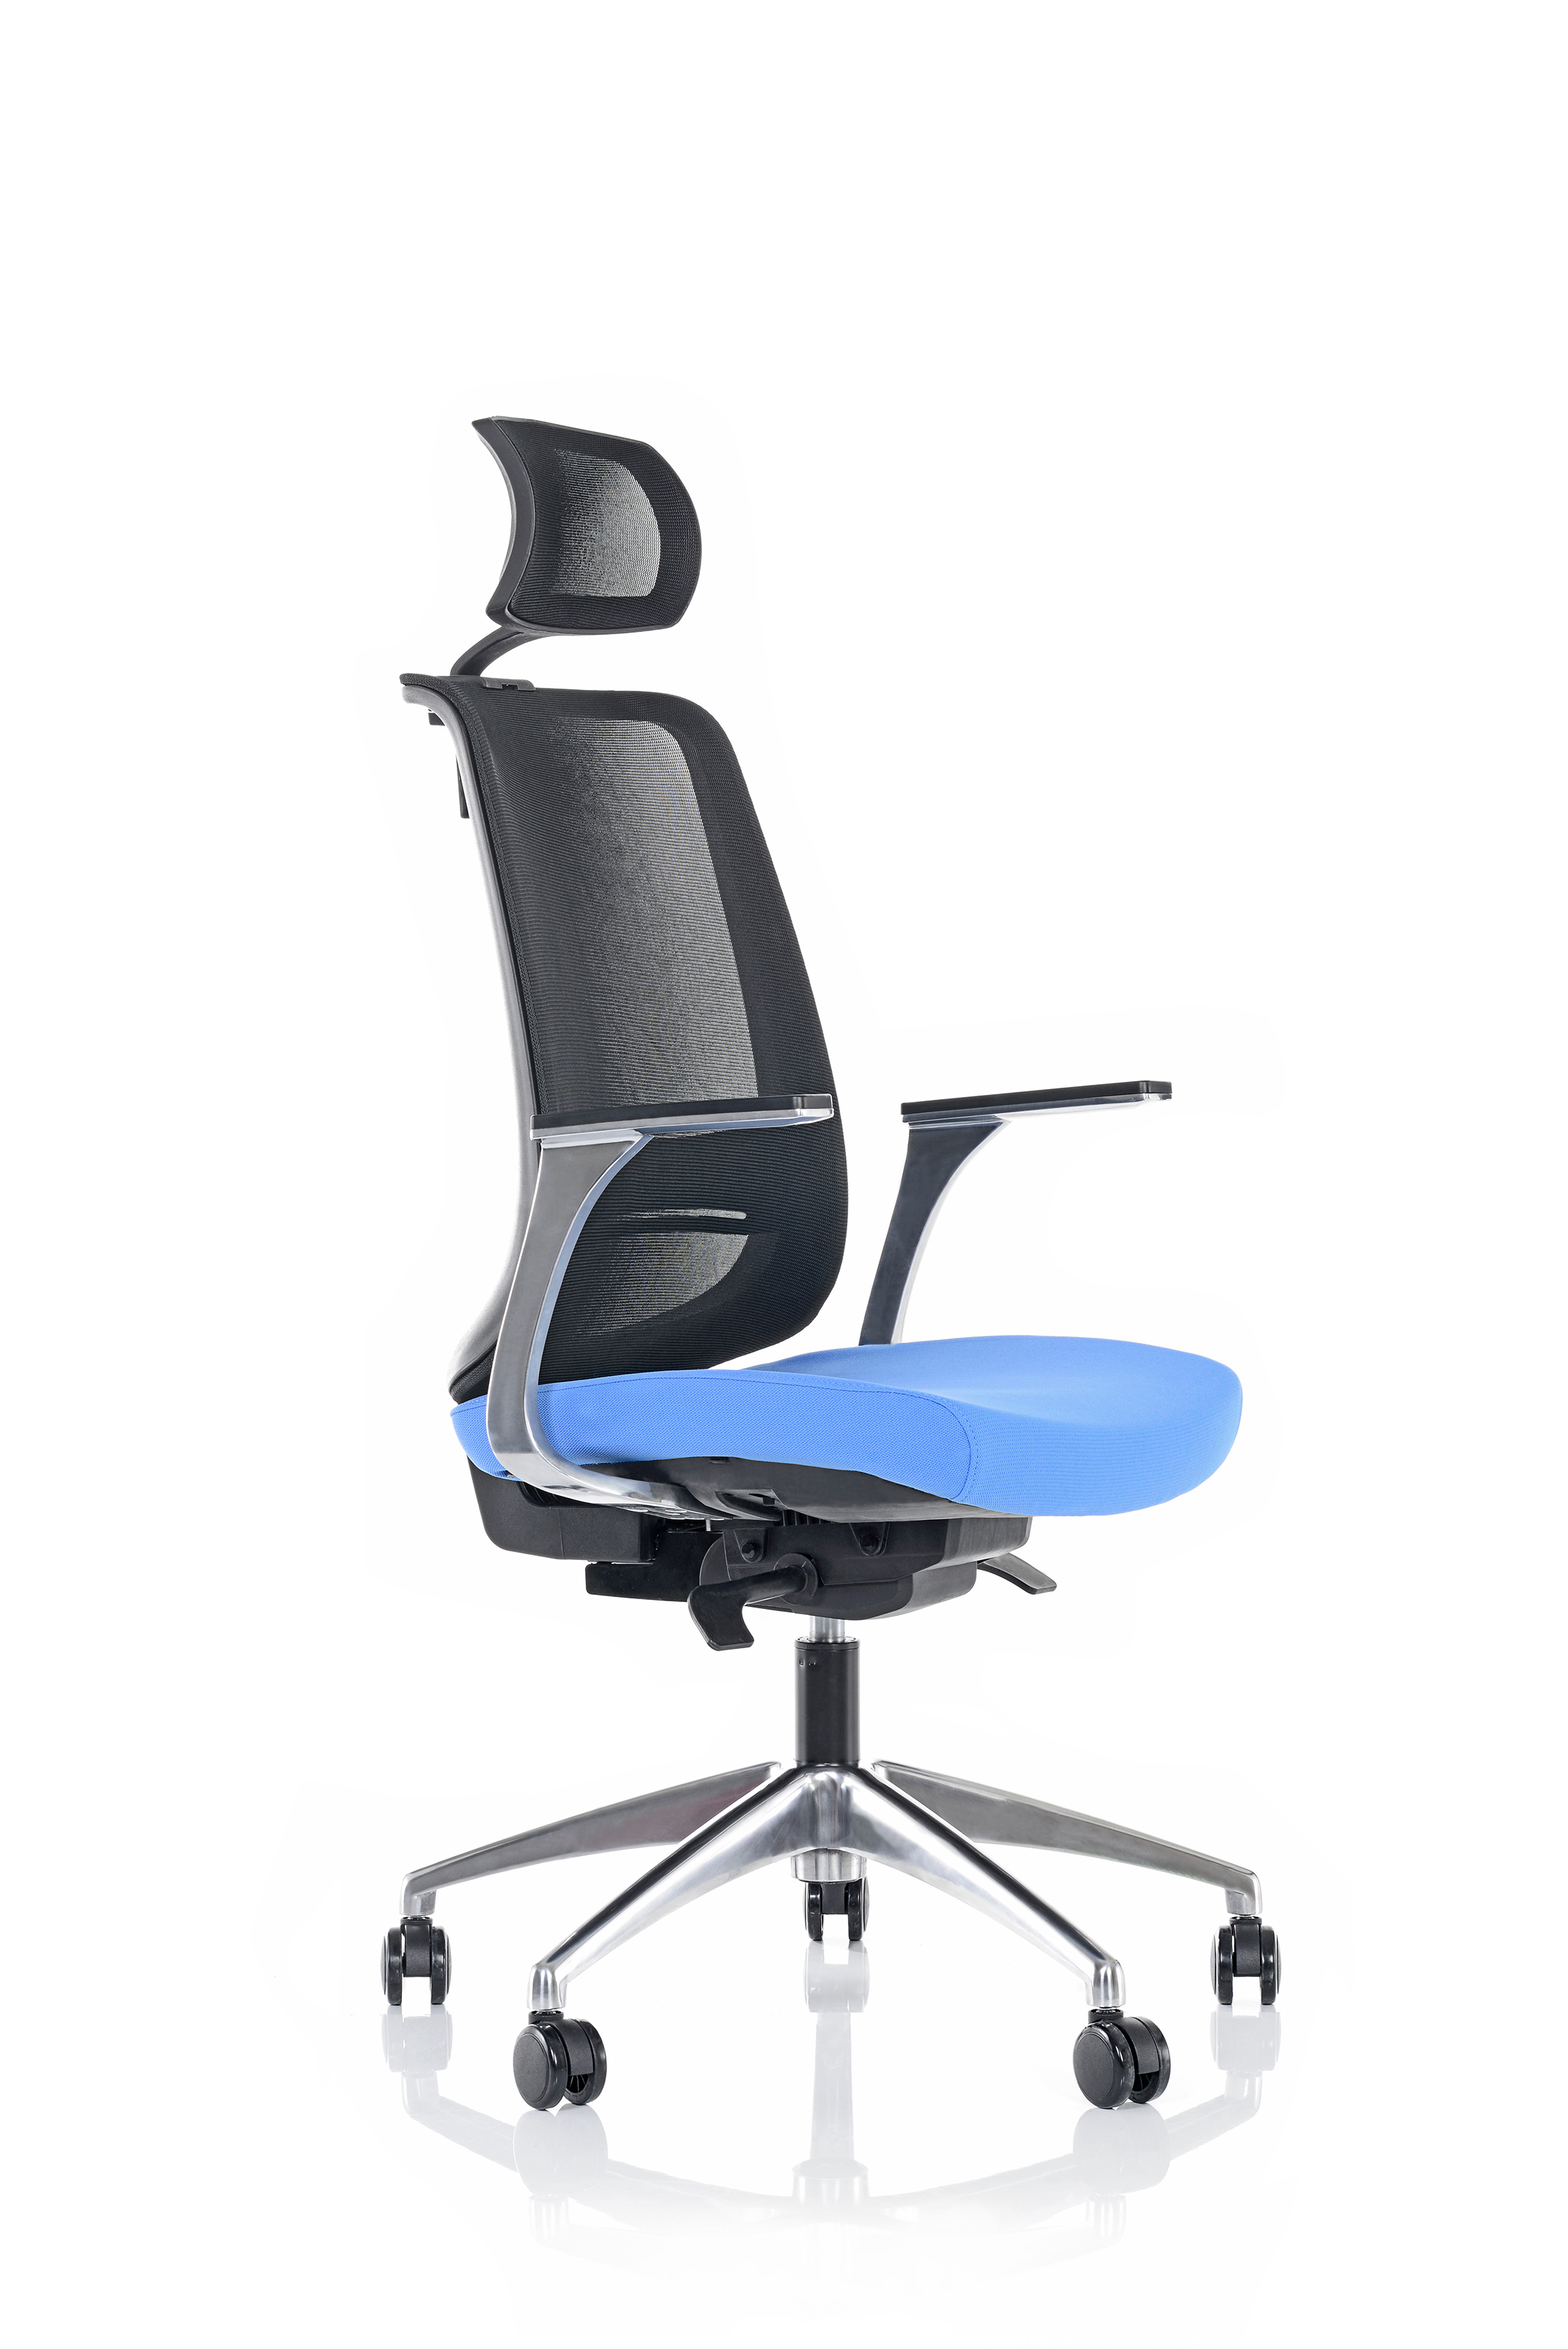 MERCUR 000C MANAGER CHAIR